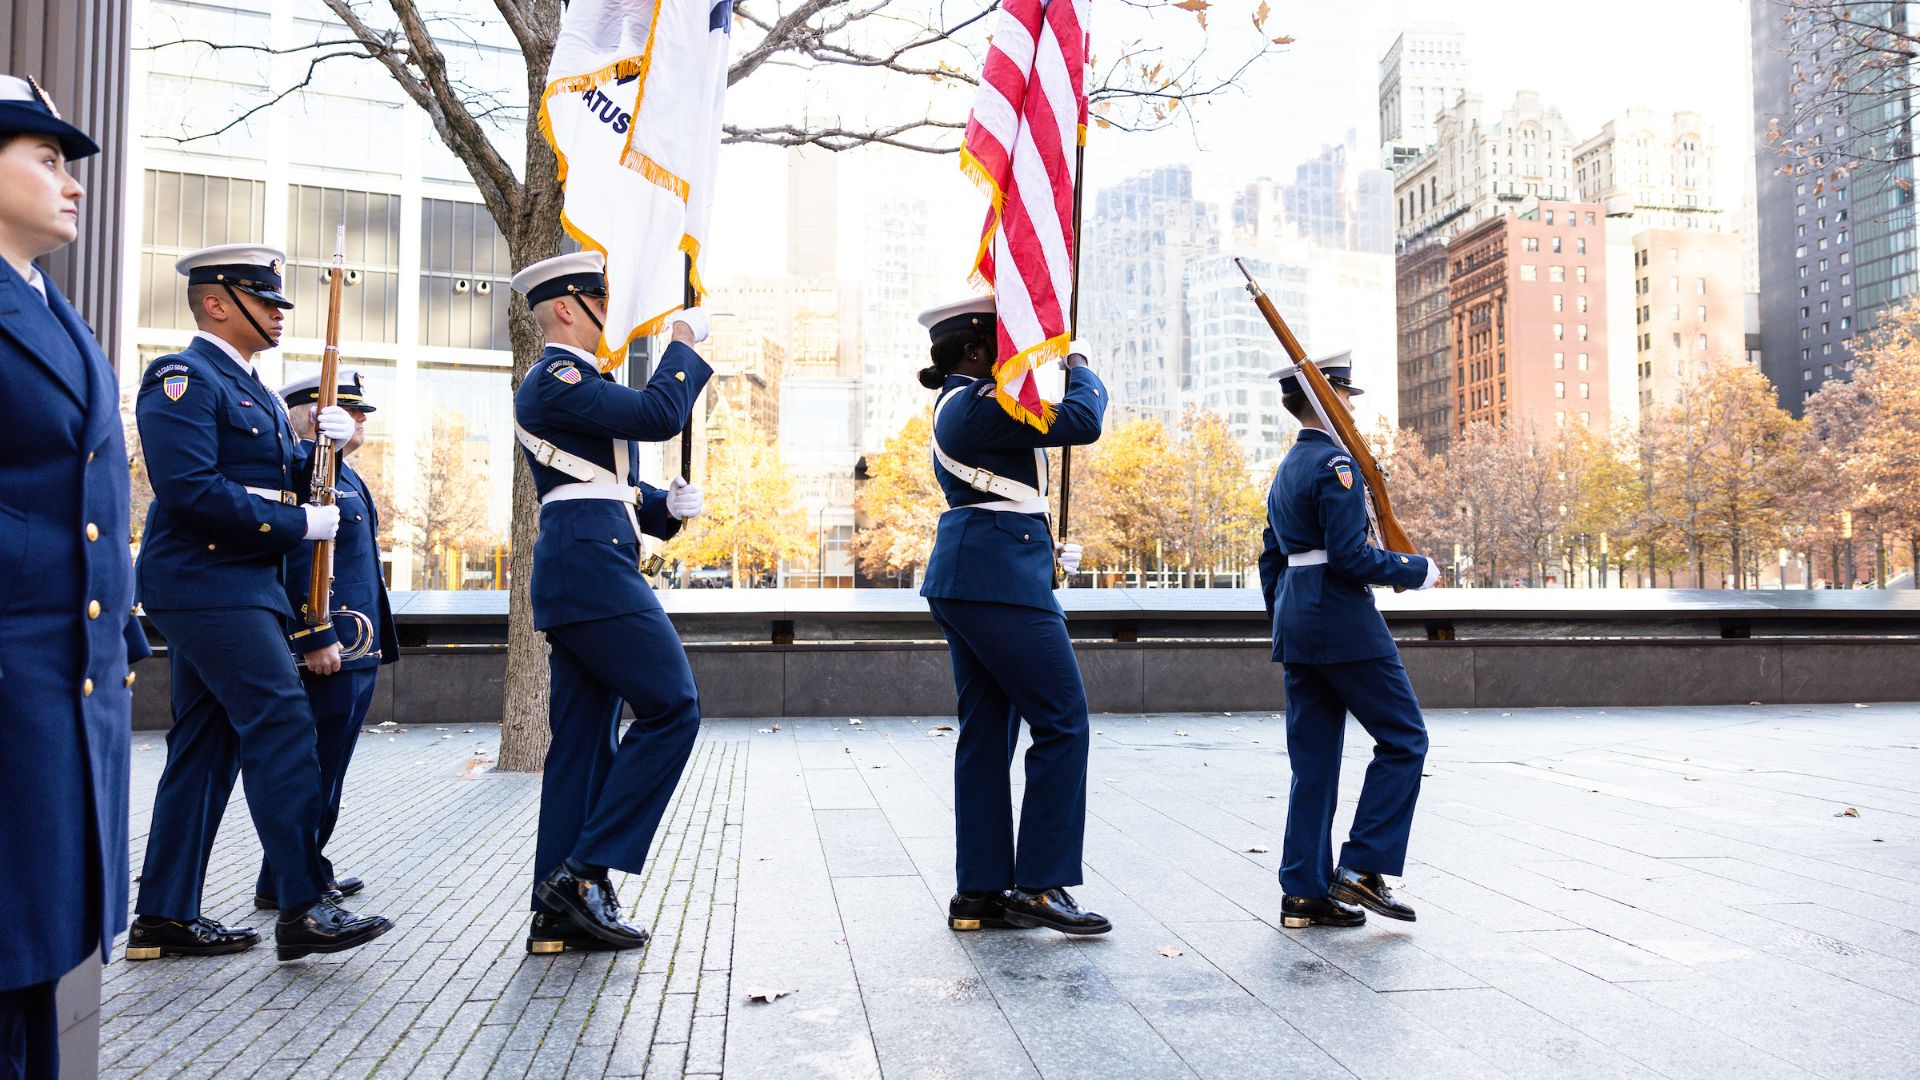 Four Coast Guard members in uniform walk across the plaza carrying instruments, flags, and a rifle, with the Memorial in background